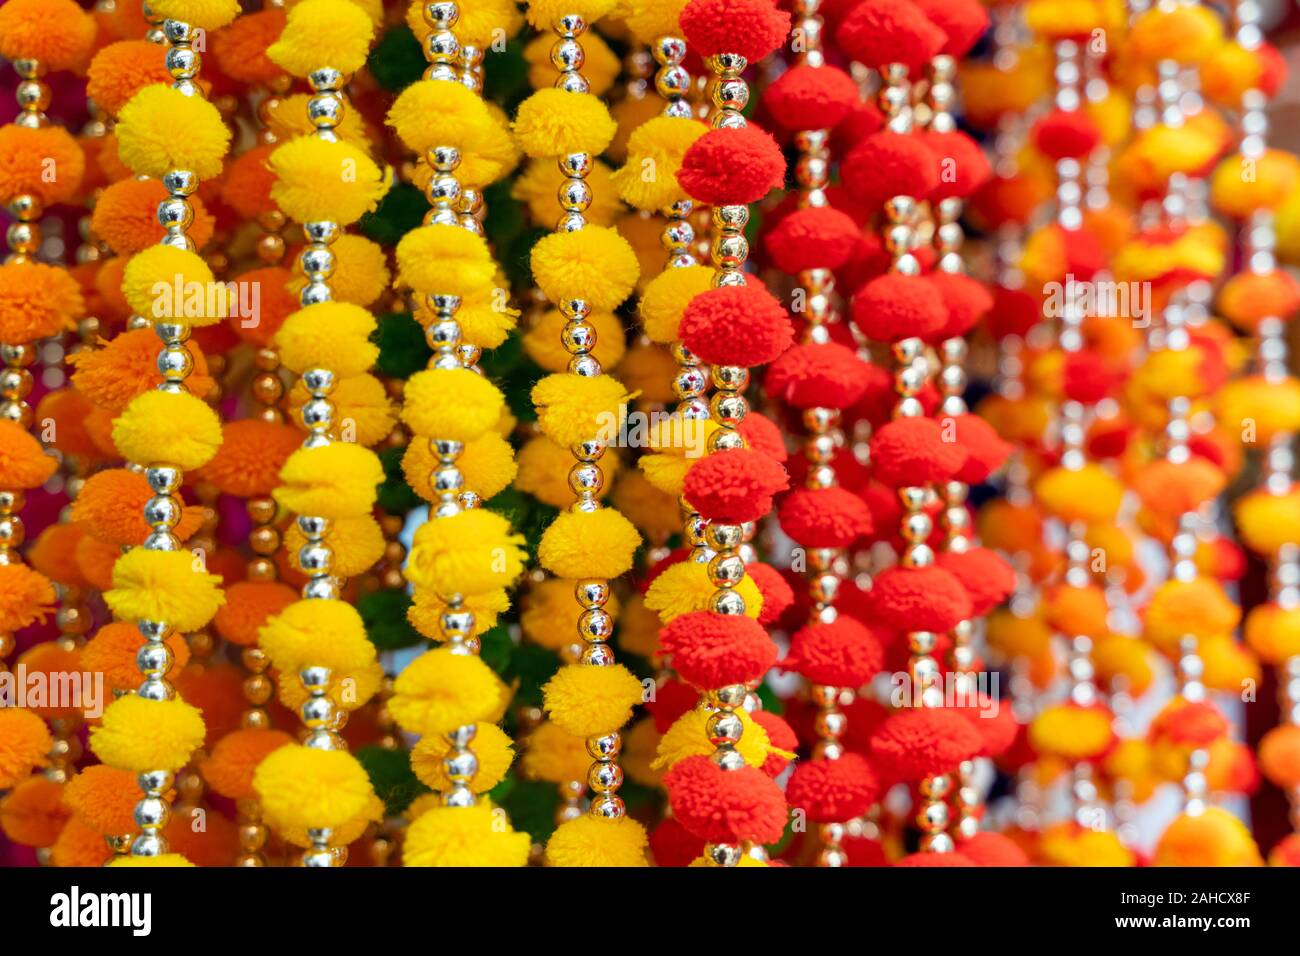 Colorful hanging Indian decorations for sale in colors of yellow, orange and red in Old Delhi market in India Stock Photo